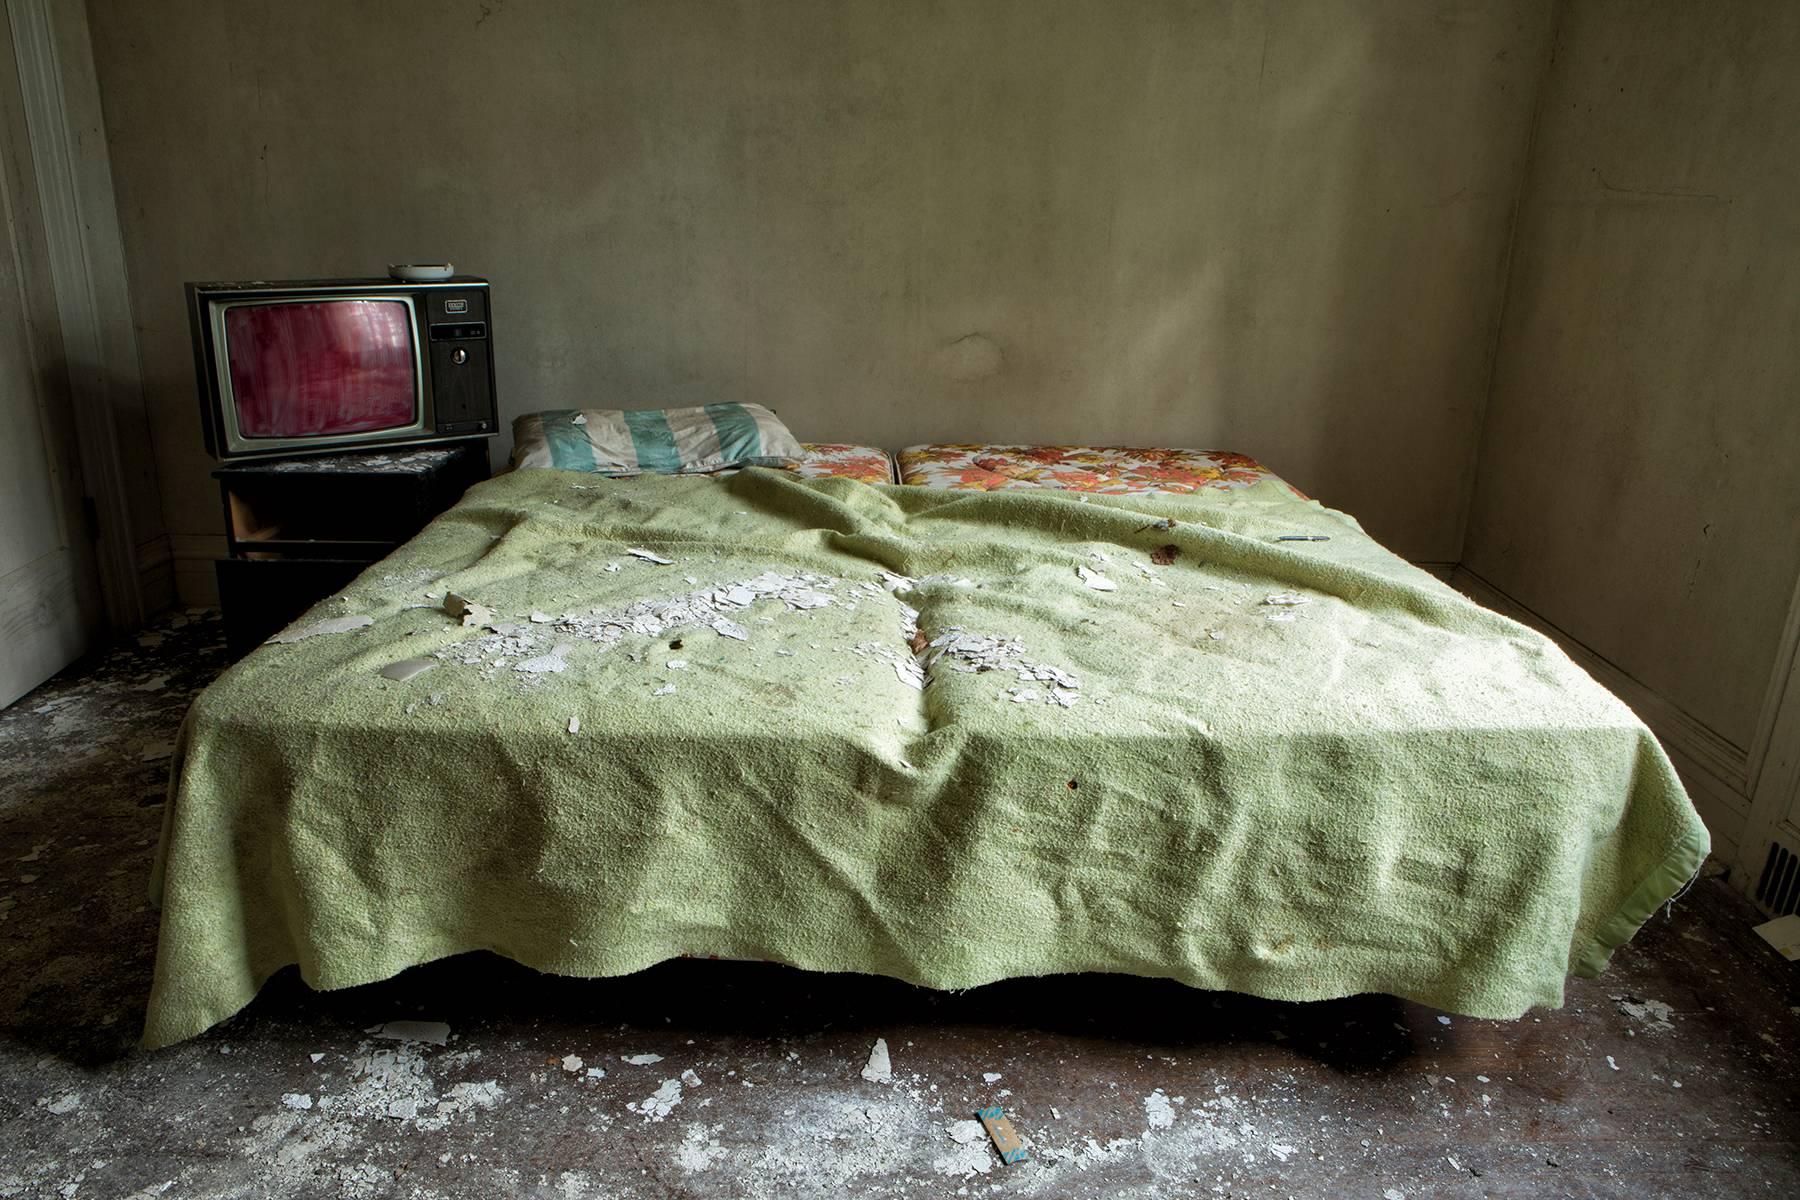 "Exhausted", color photograph, abandoned, bed, television, green, metal print - Photograph by Rebecca Skinner